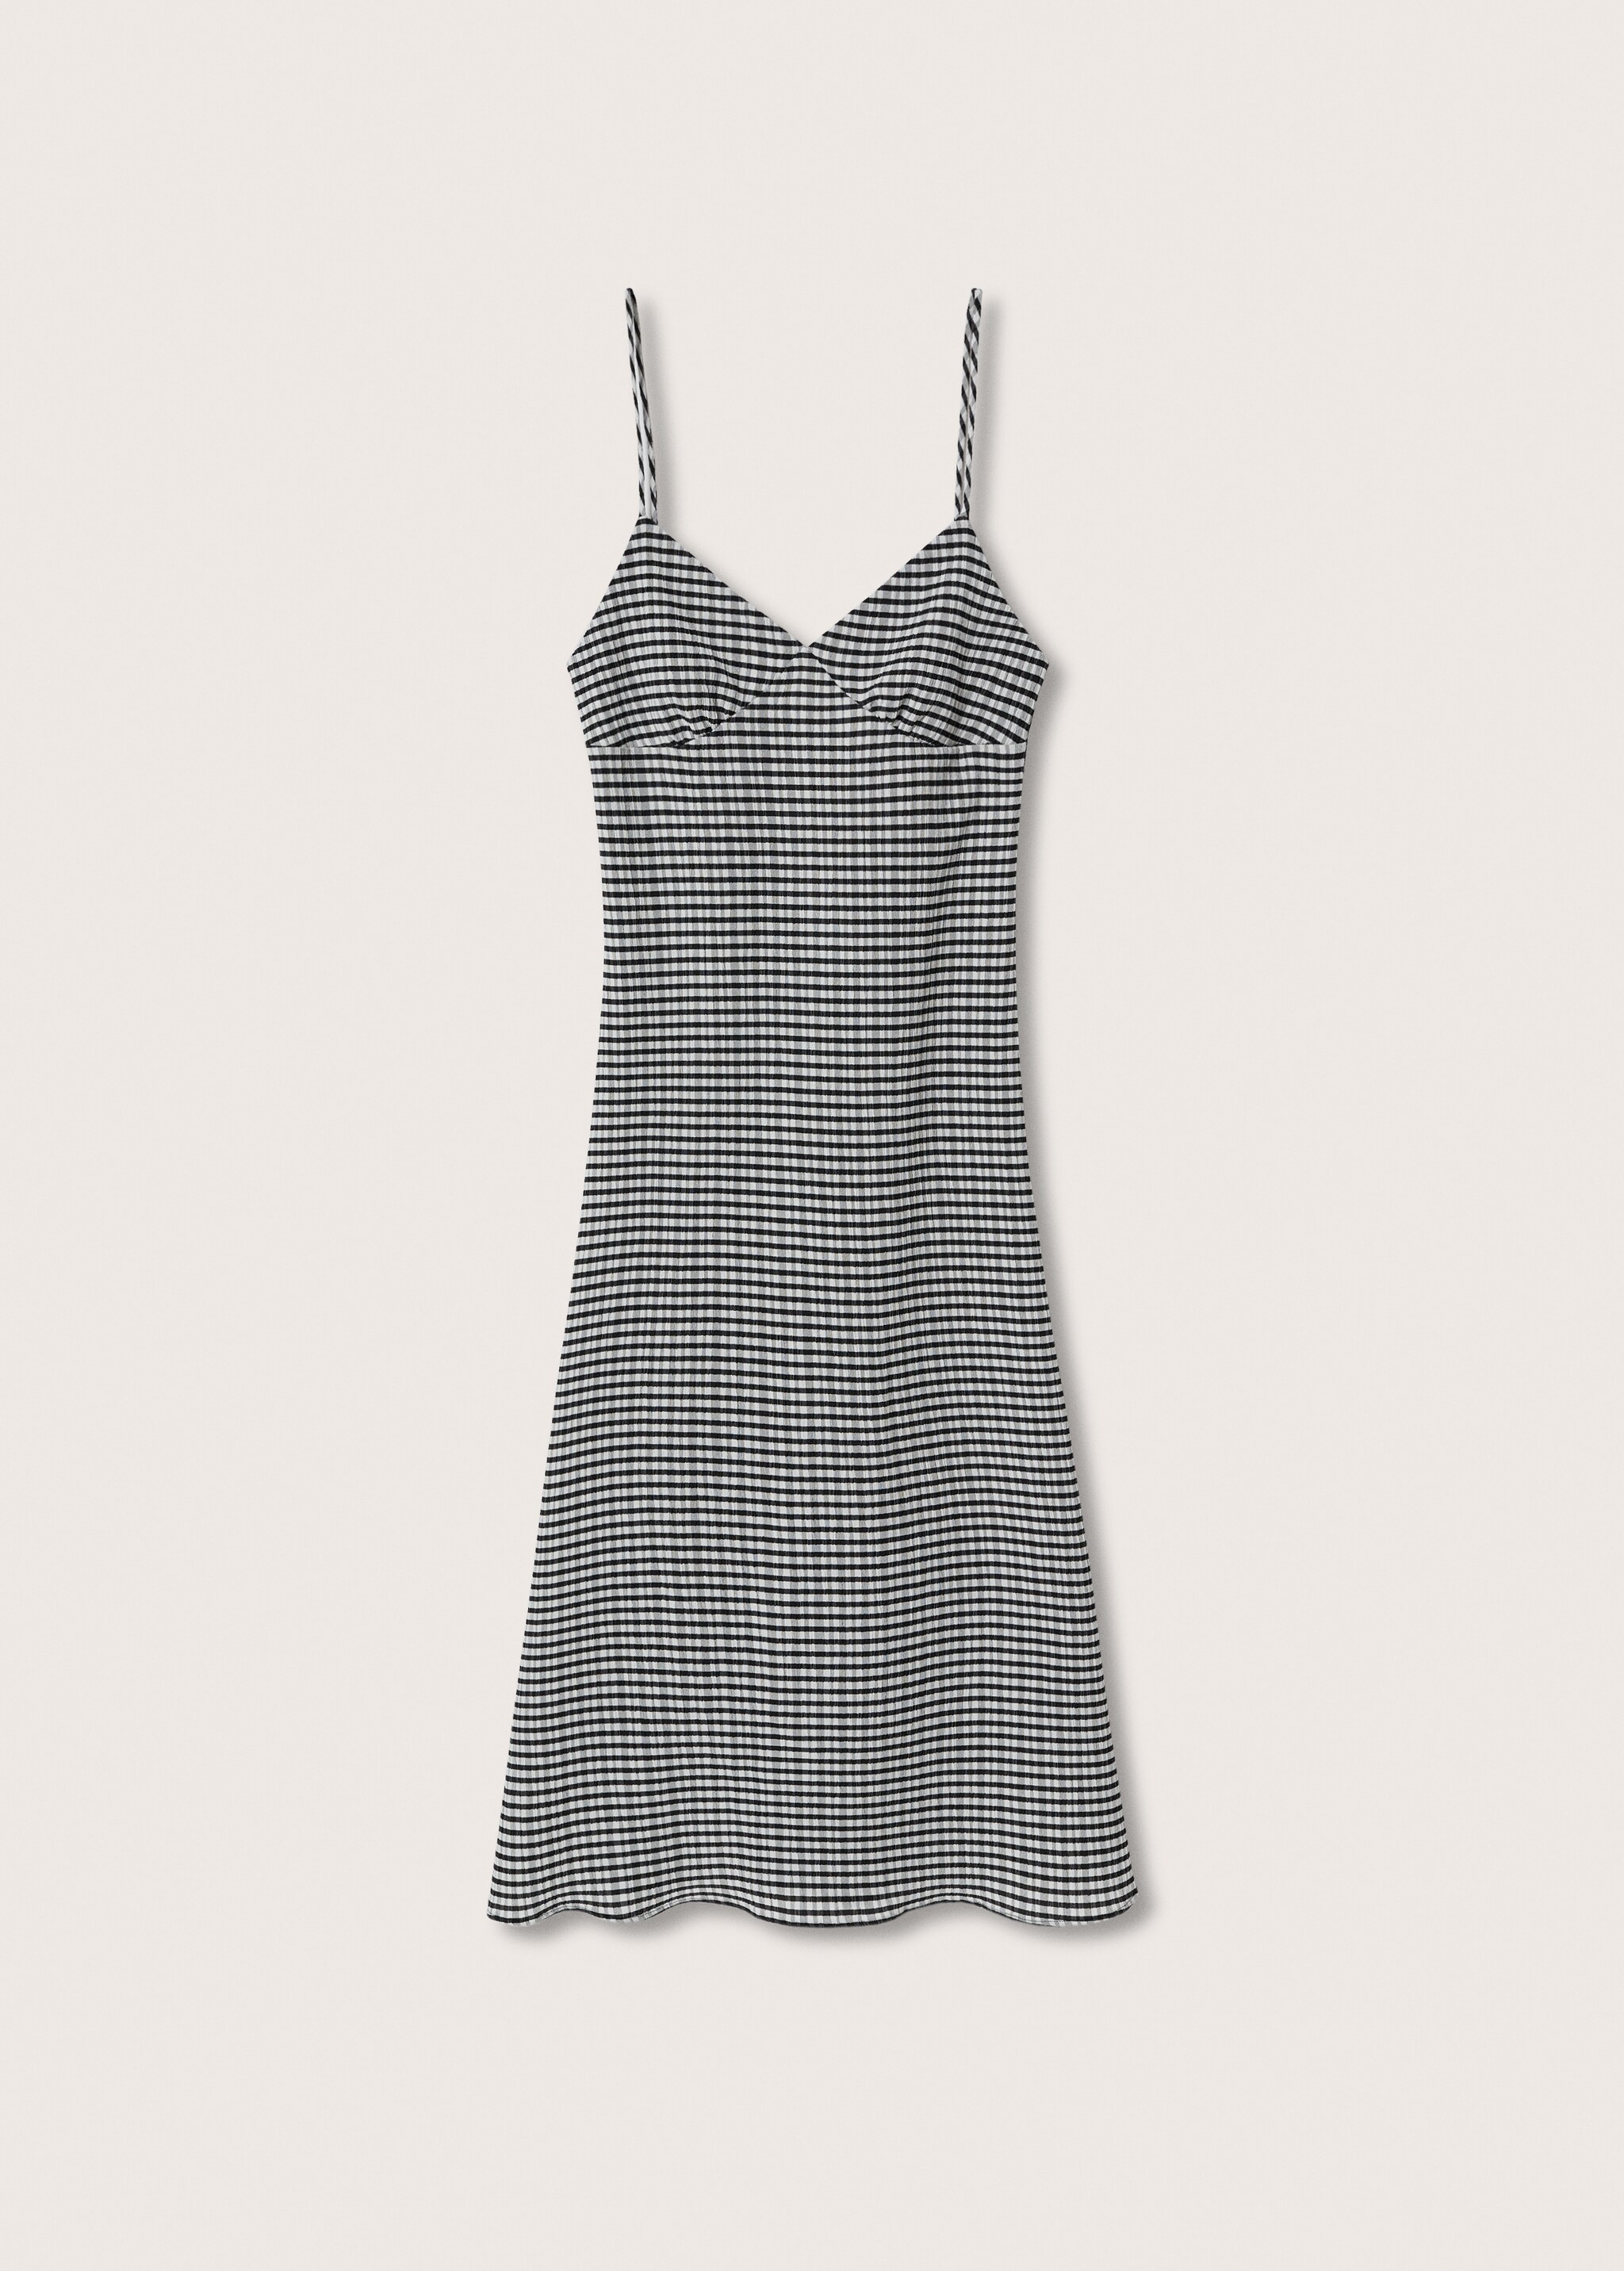 Vichy check dress - Article without model